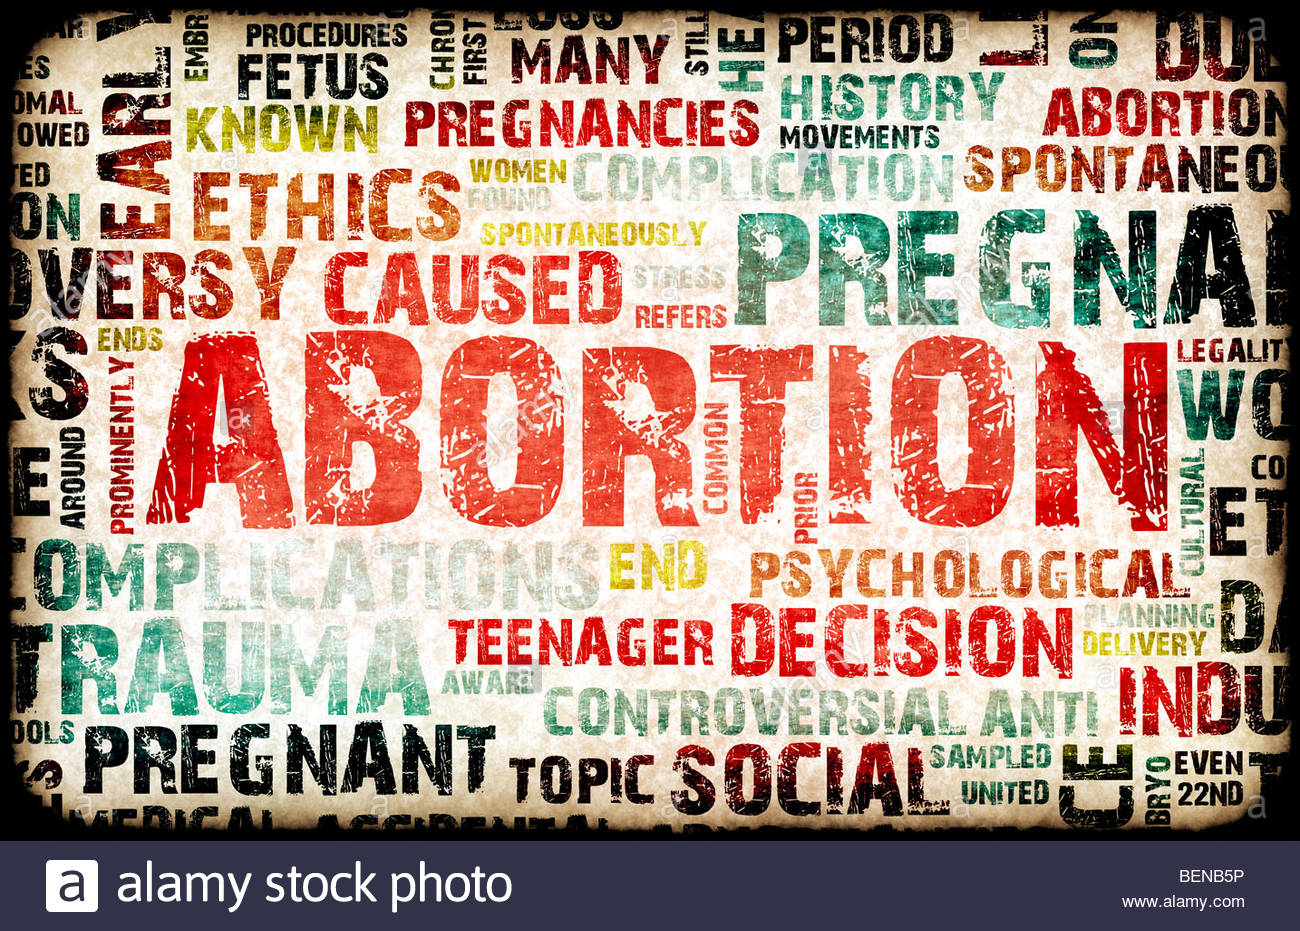 Abortion Of Pregnancy Danger Background As A Art Stock Photo